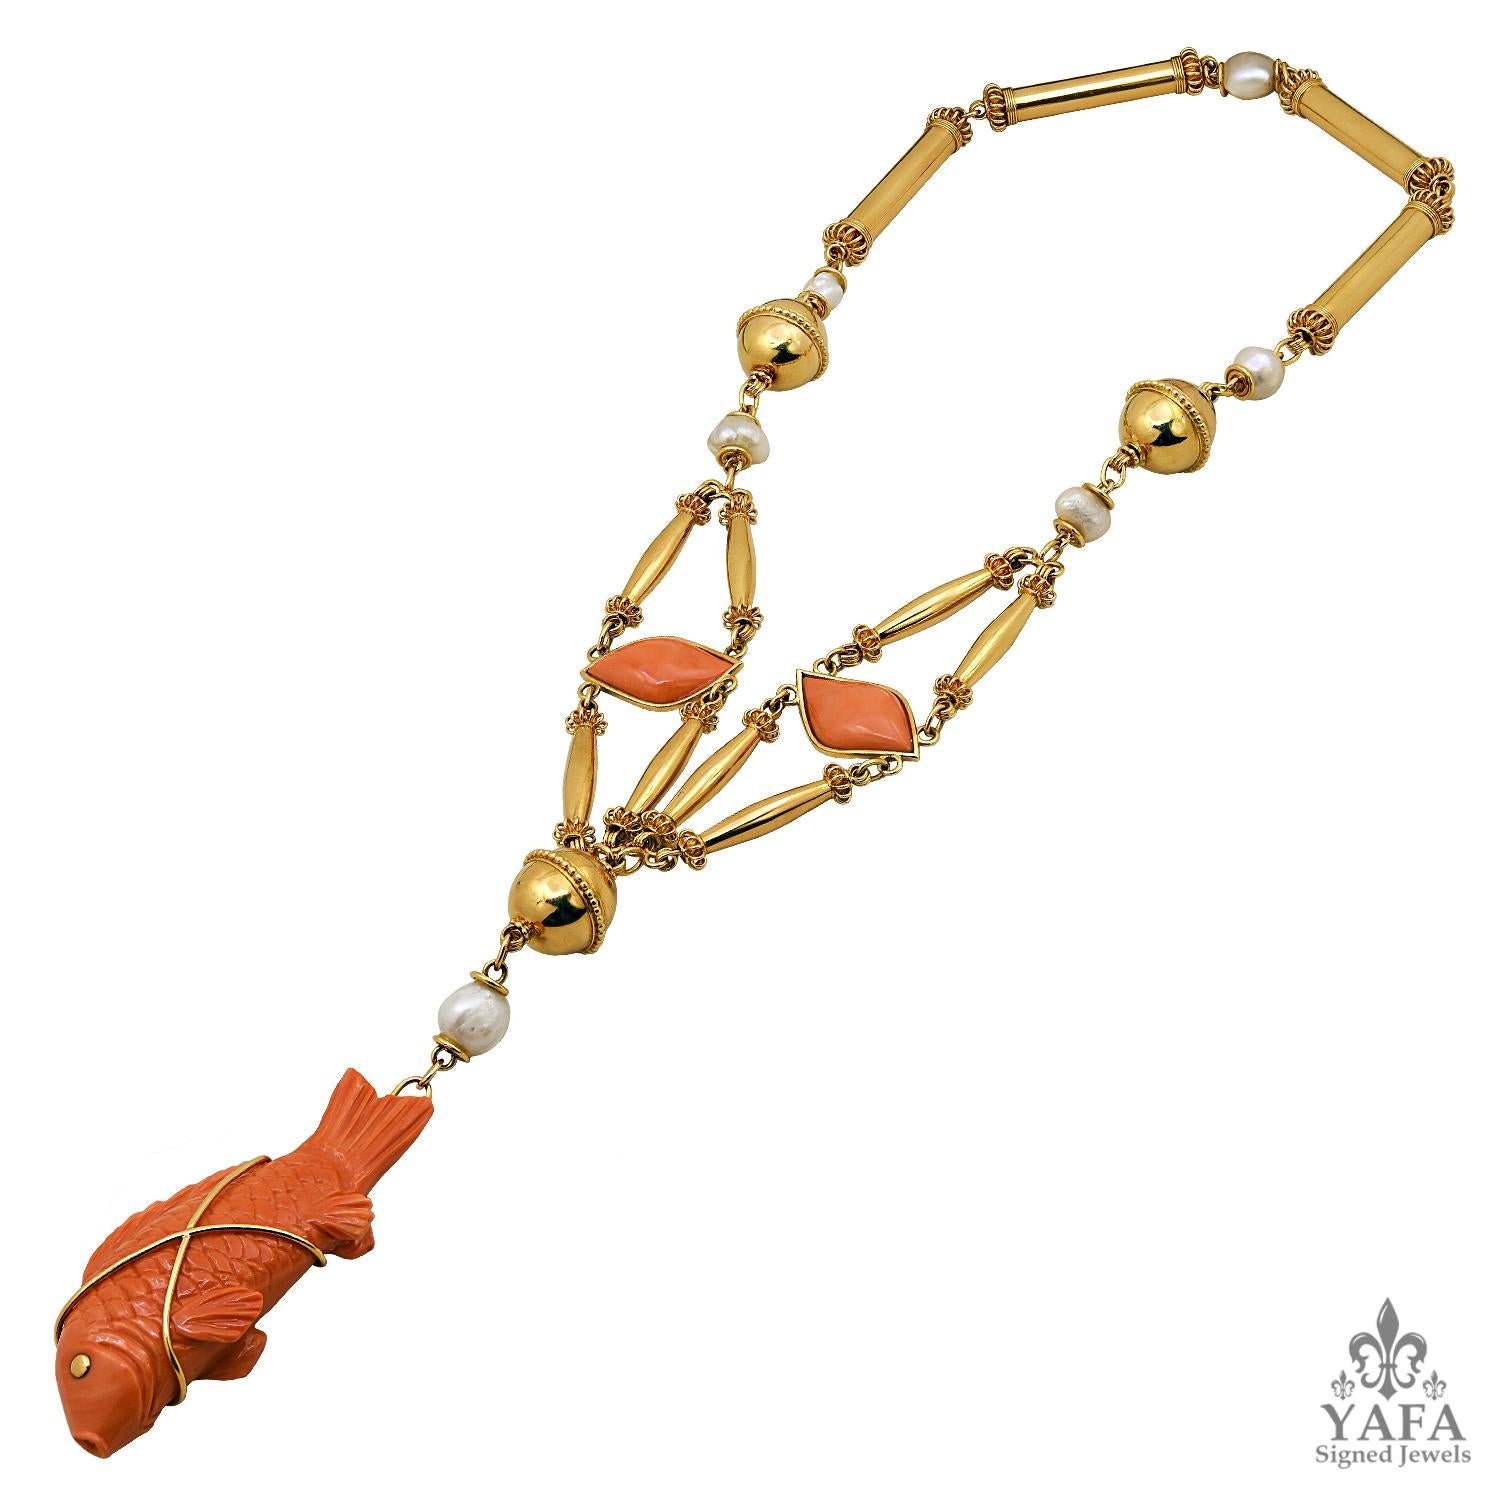 CARTIER Cabochon Carved Coral Fish Necklace
18k yellow gold fish motif necklace, set with cabochon, carved coral, pearls, pendant detachable.
Signed “CARTIER PARIS“